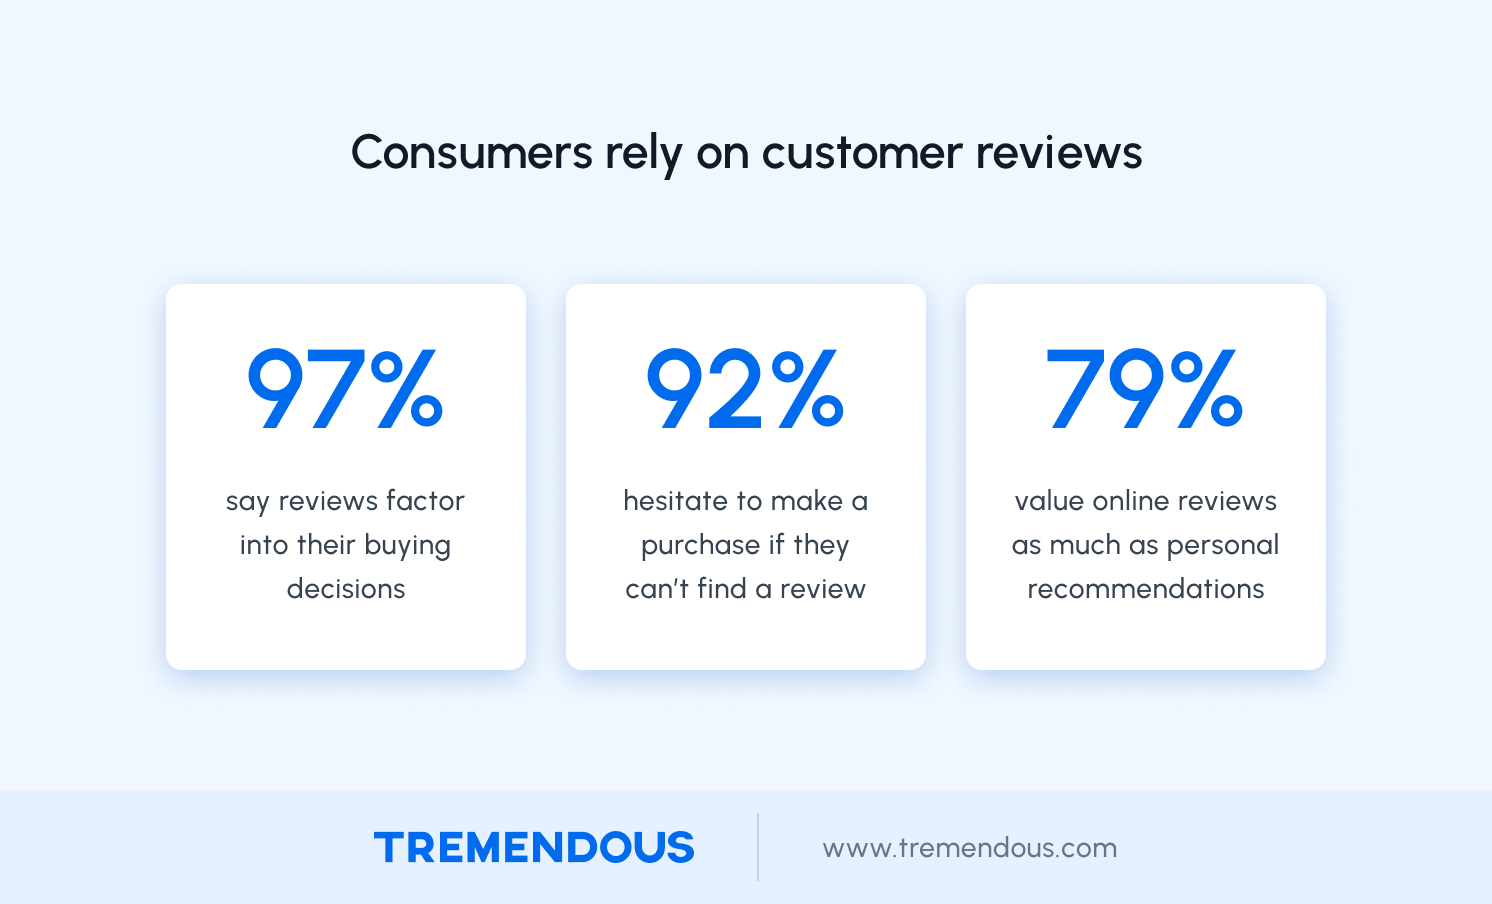 A graphic showing that 97% of people say reviews factor into their buying decisions, 92% hesitate to make a purchase if they can't find a review, and 79% value online reviews as much as personal recommendations.